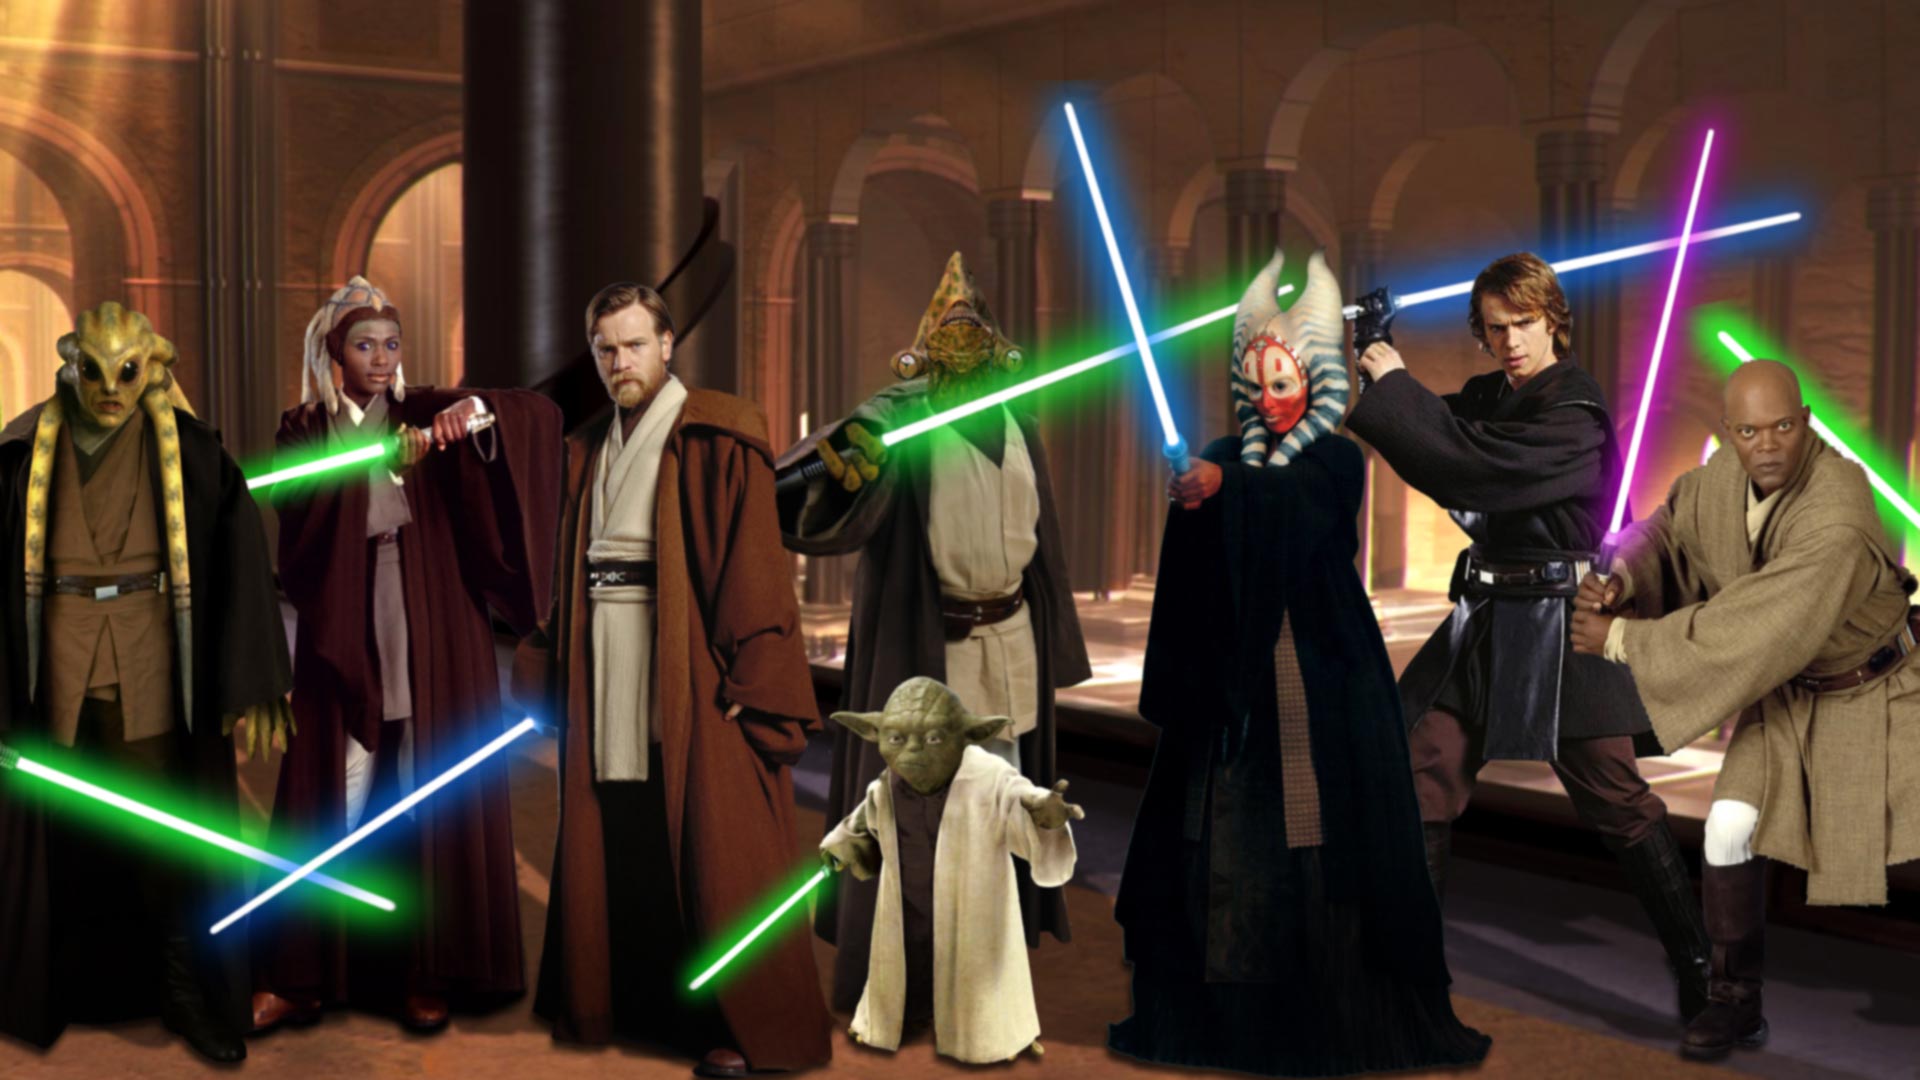 The Force is strong with this one: A definitive ranking of the most powerful Sith and Jedi in the Star Wars films